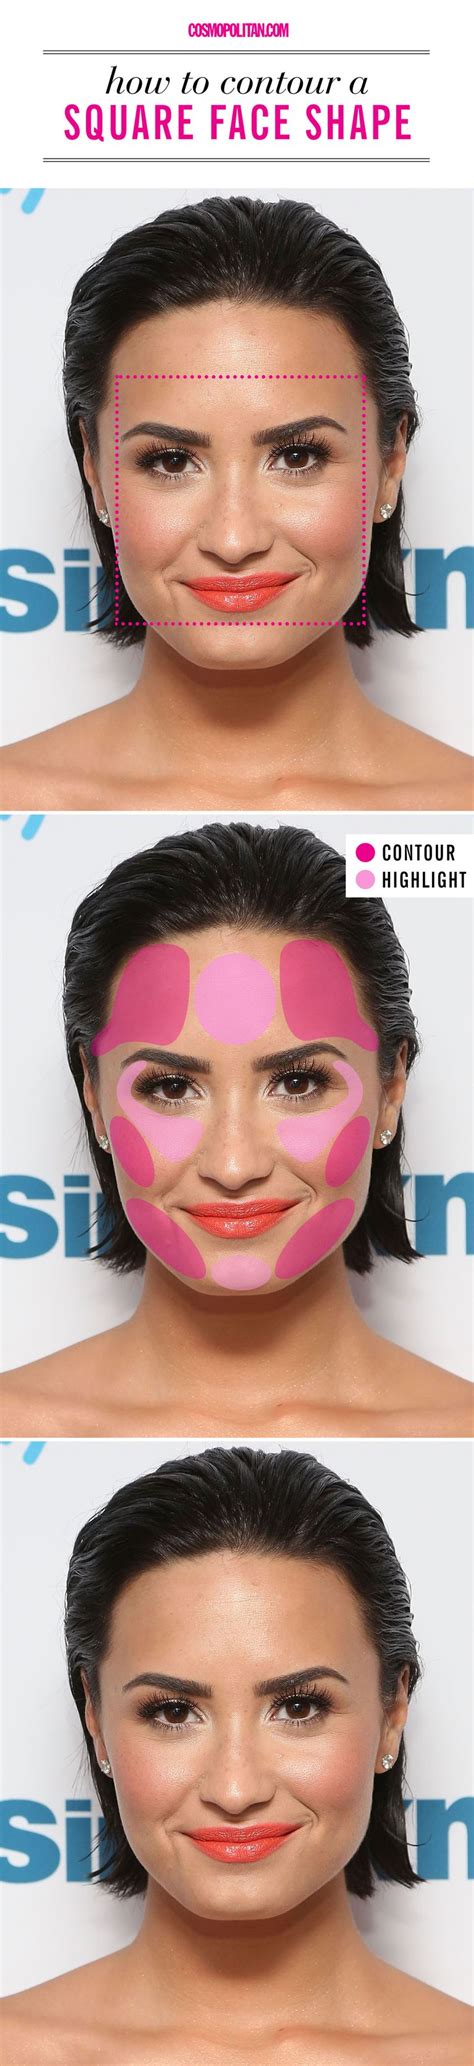 Correct Technique To Contour Different Types Of Face Shapes